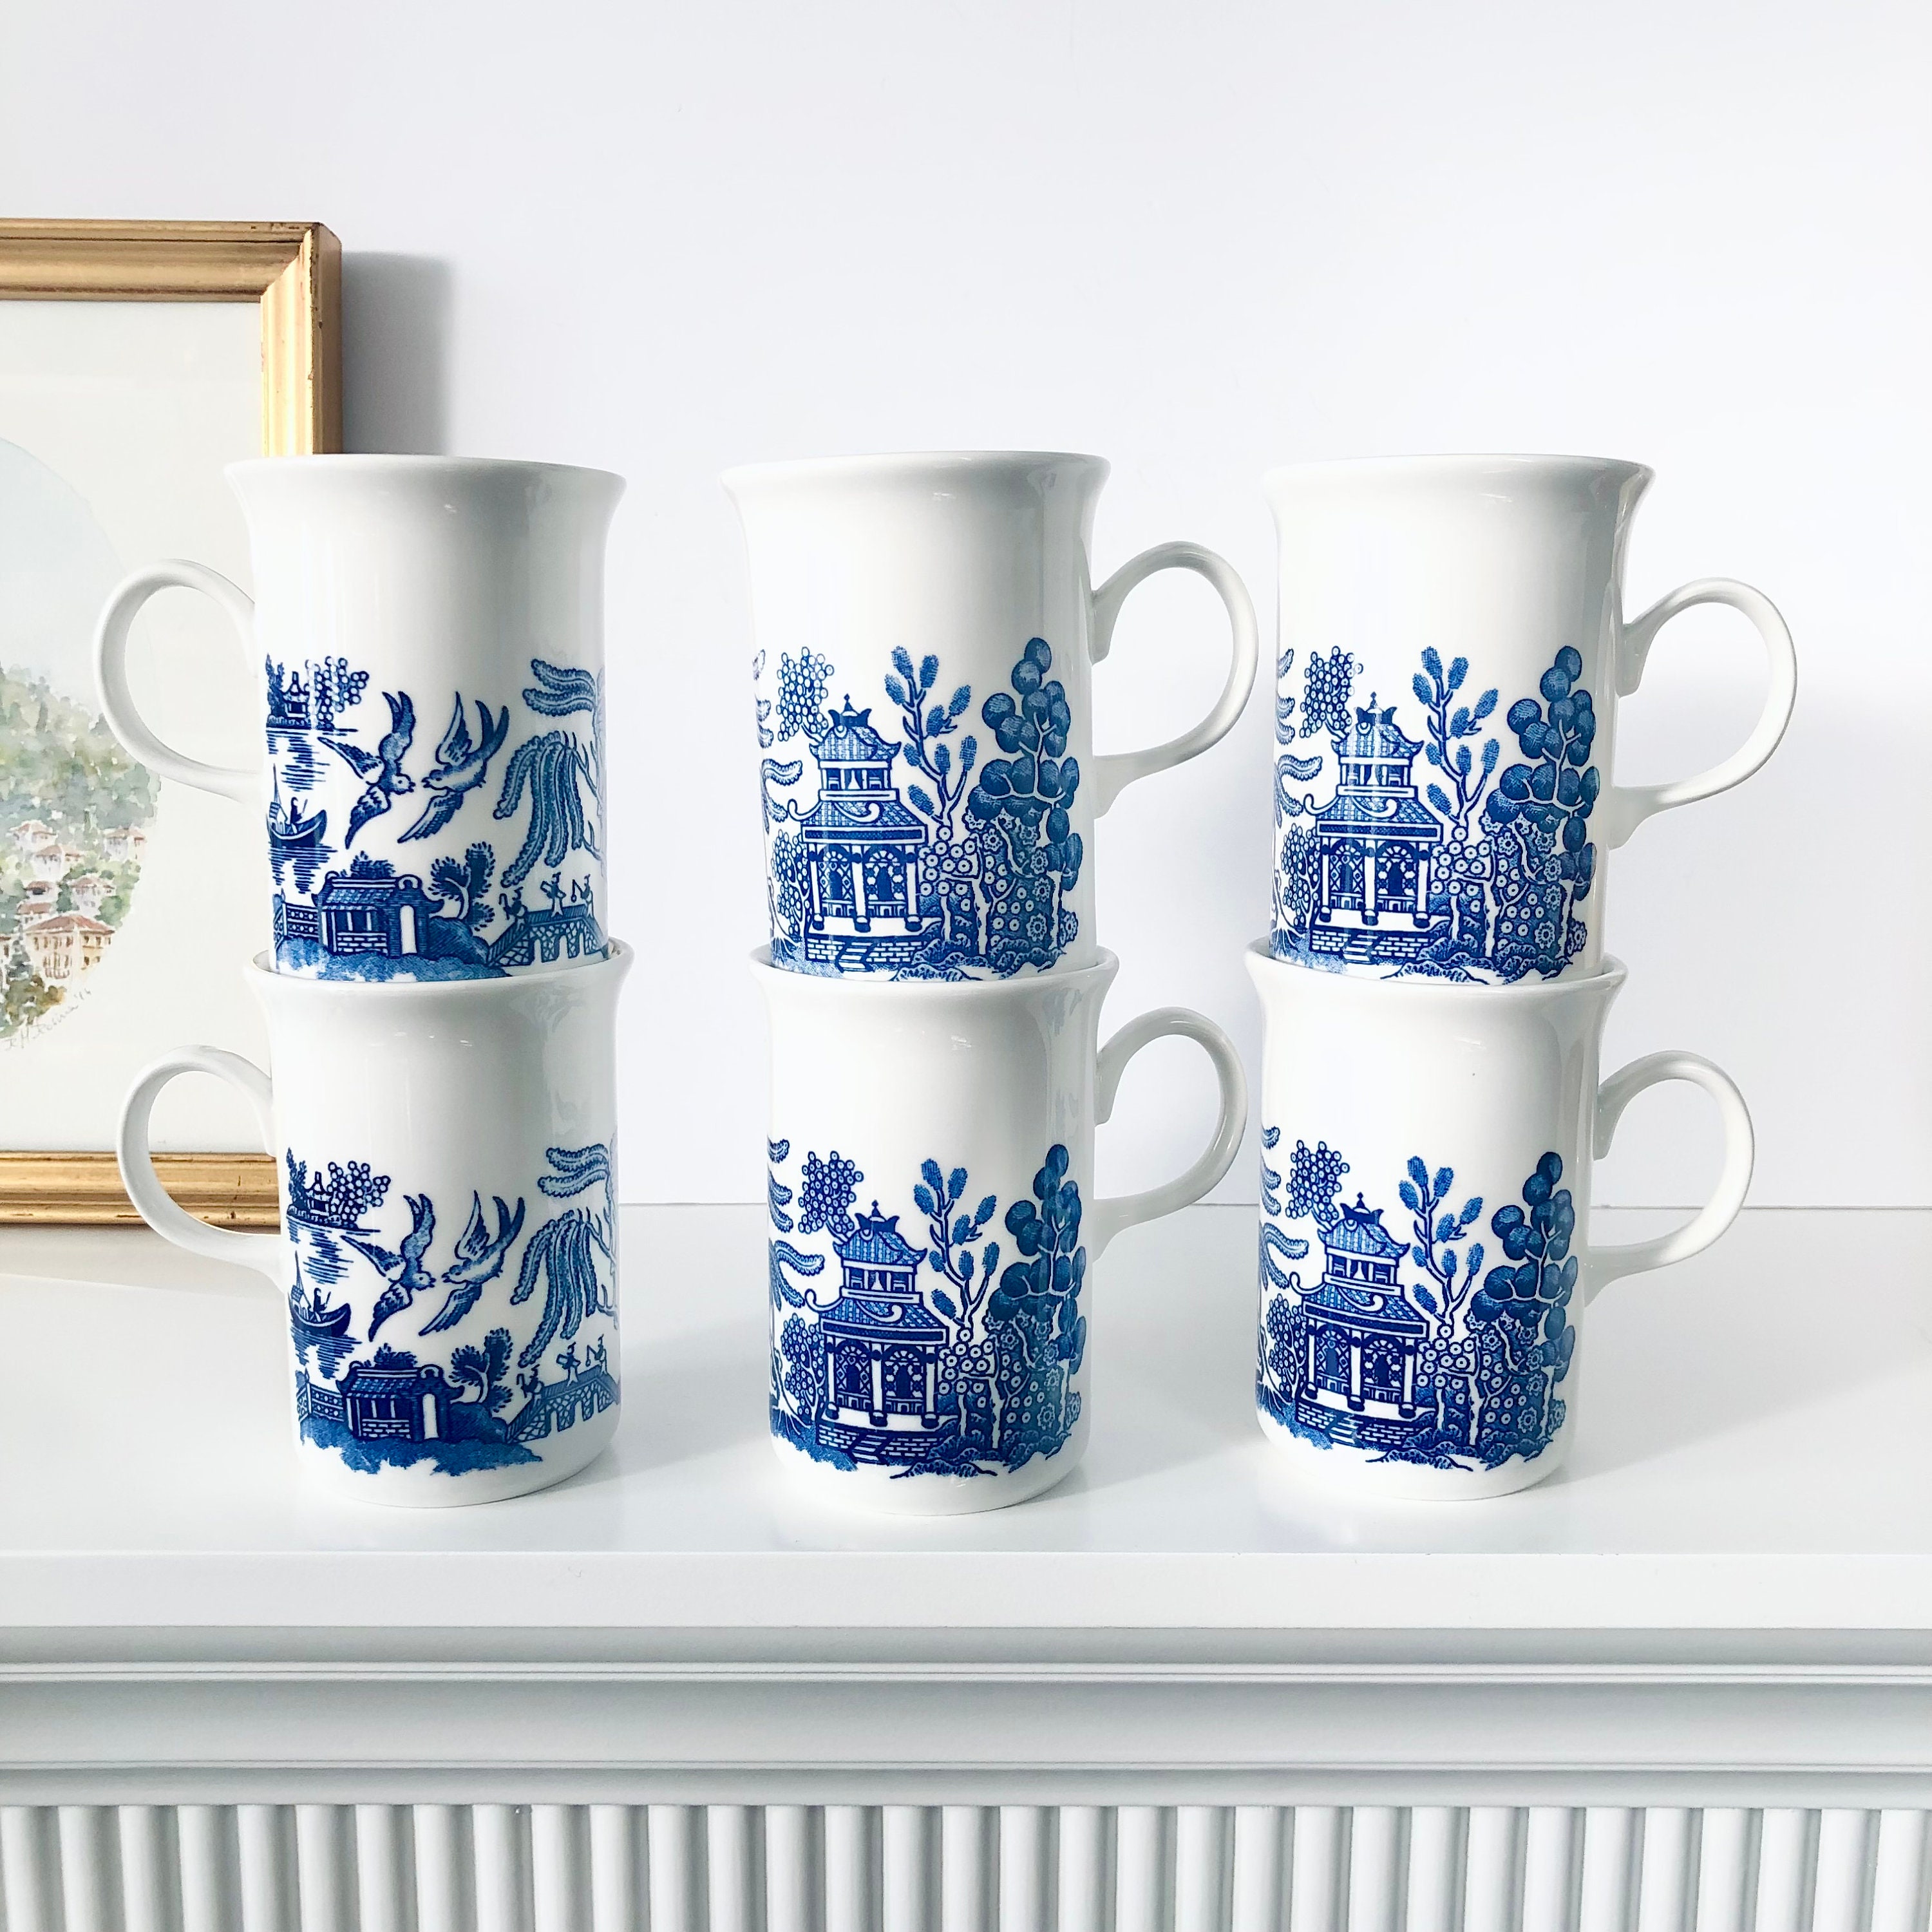 Blue Willow Dishes, Delft Blue, Porcelain Chinaware, Unique Cool Coffee Mugs Calamityware: Things Could Be Worse (Set of 4), Single 12-oz Mug